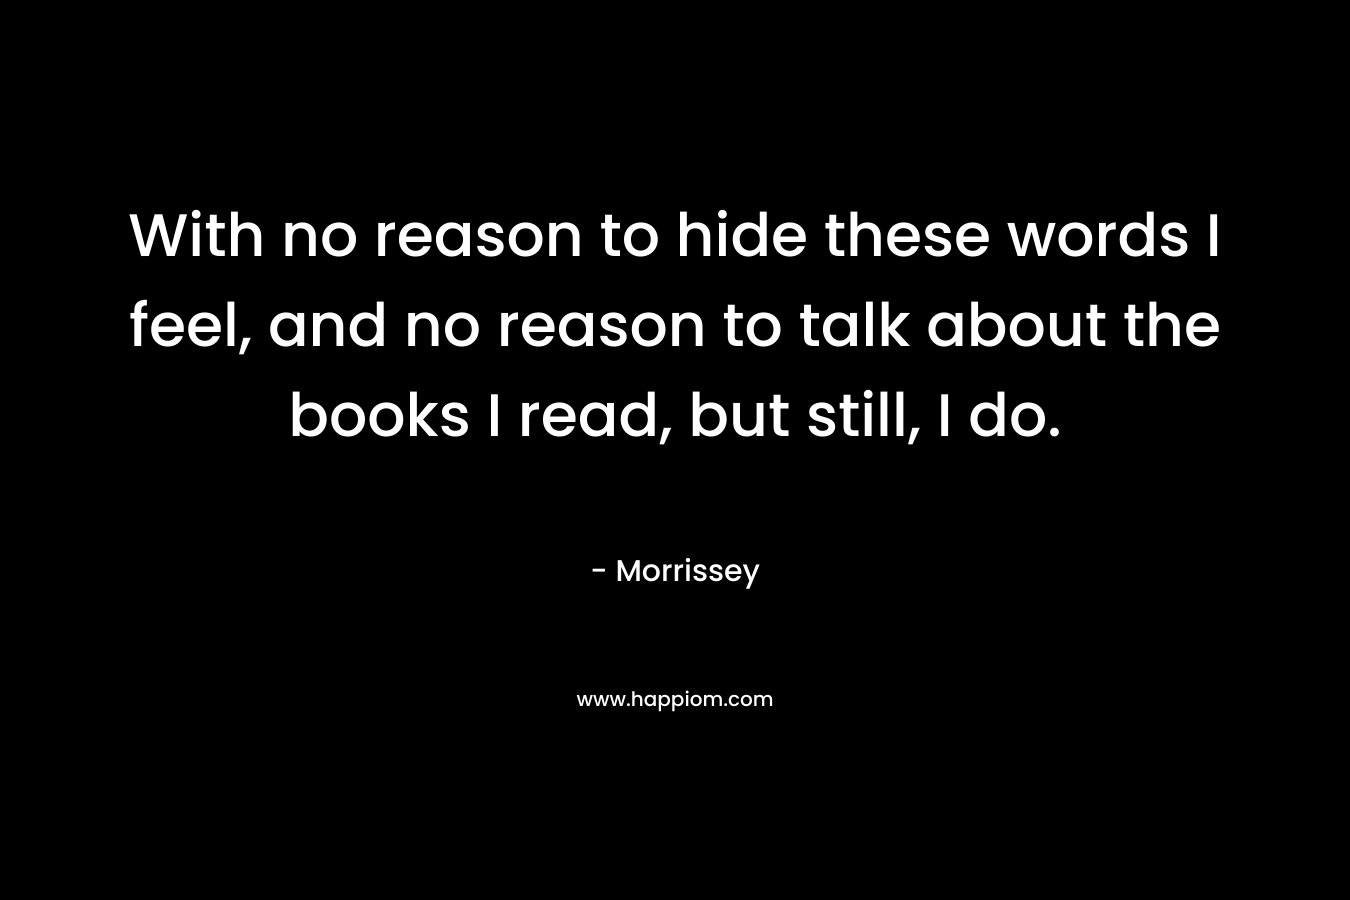 With no reason to hide these words I feel, and no reason to talk about the books I read, but still, I do.